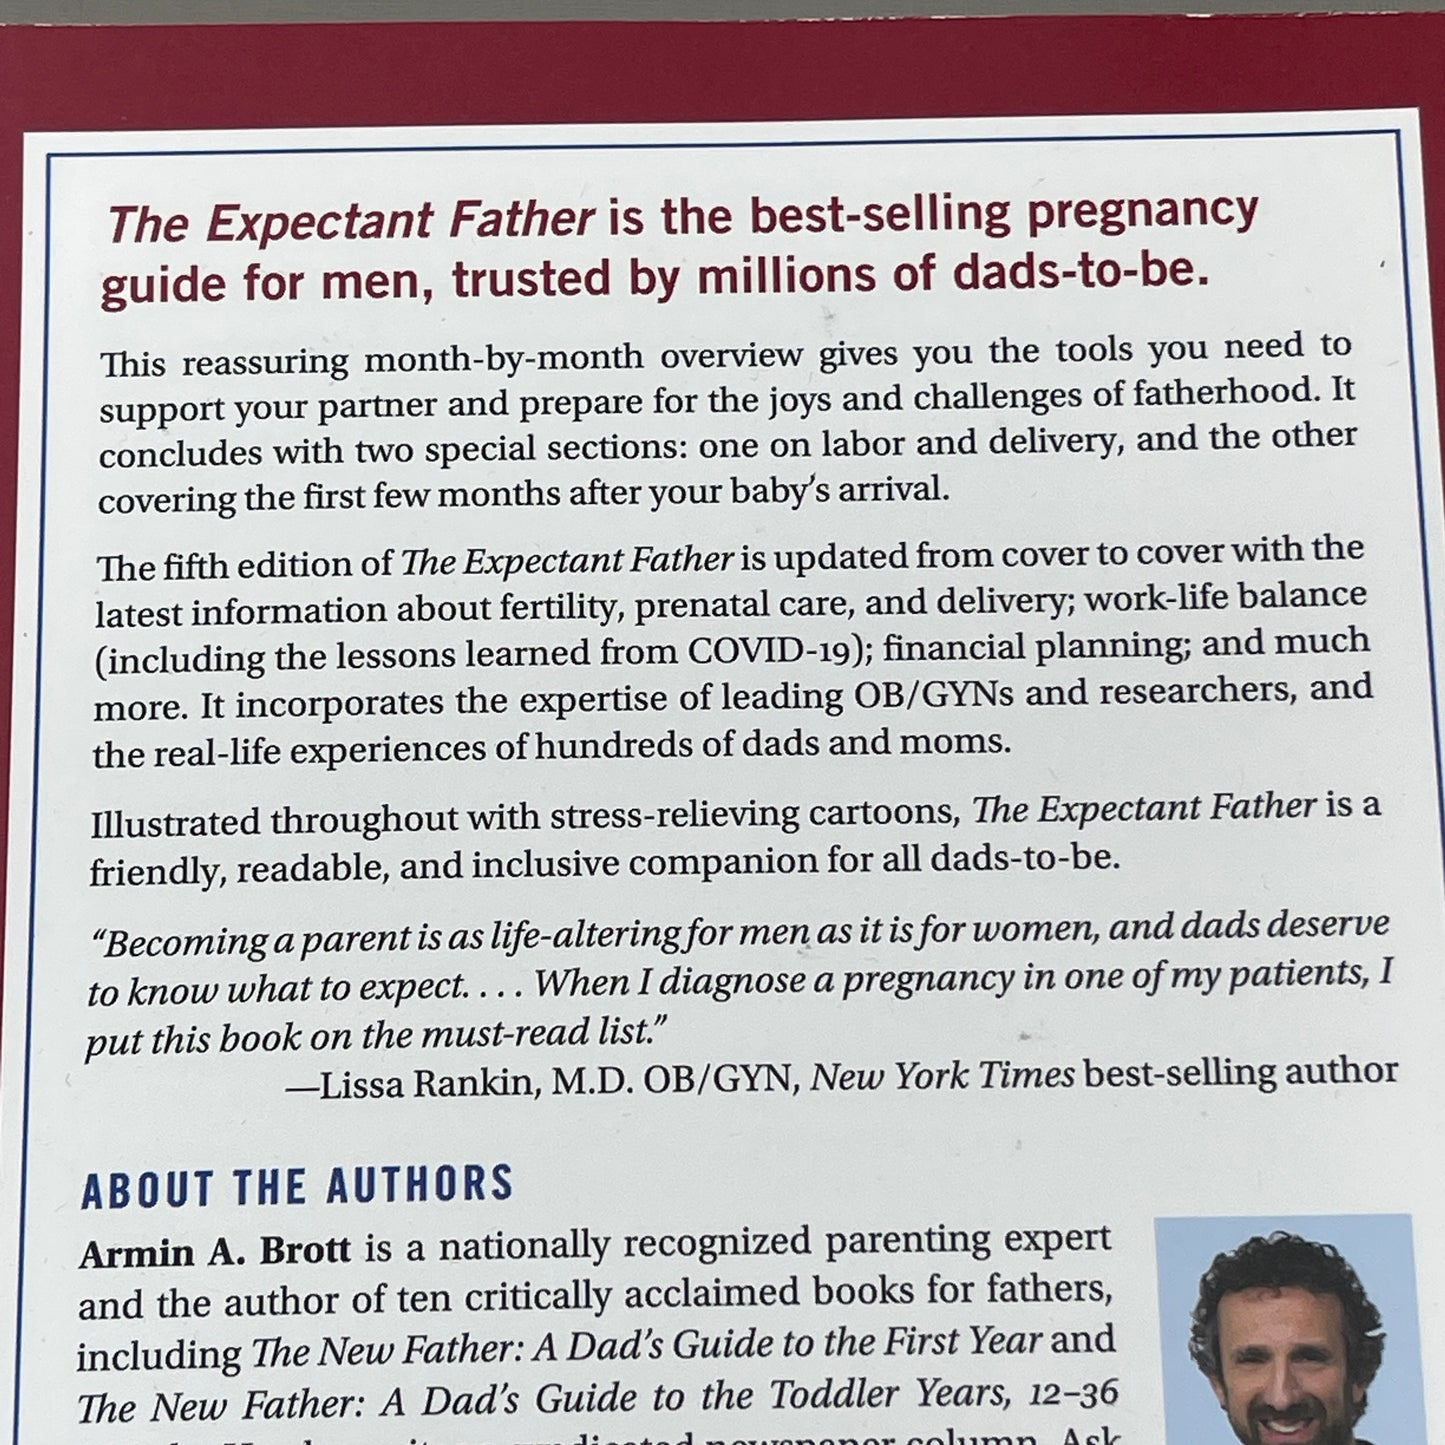 The Expectant Father The Ultimate Guide For Dads-To-Be Paperback Book By Armin Brott & Jennifer Ash Rudick (New)